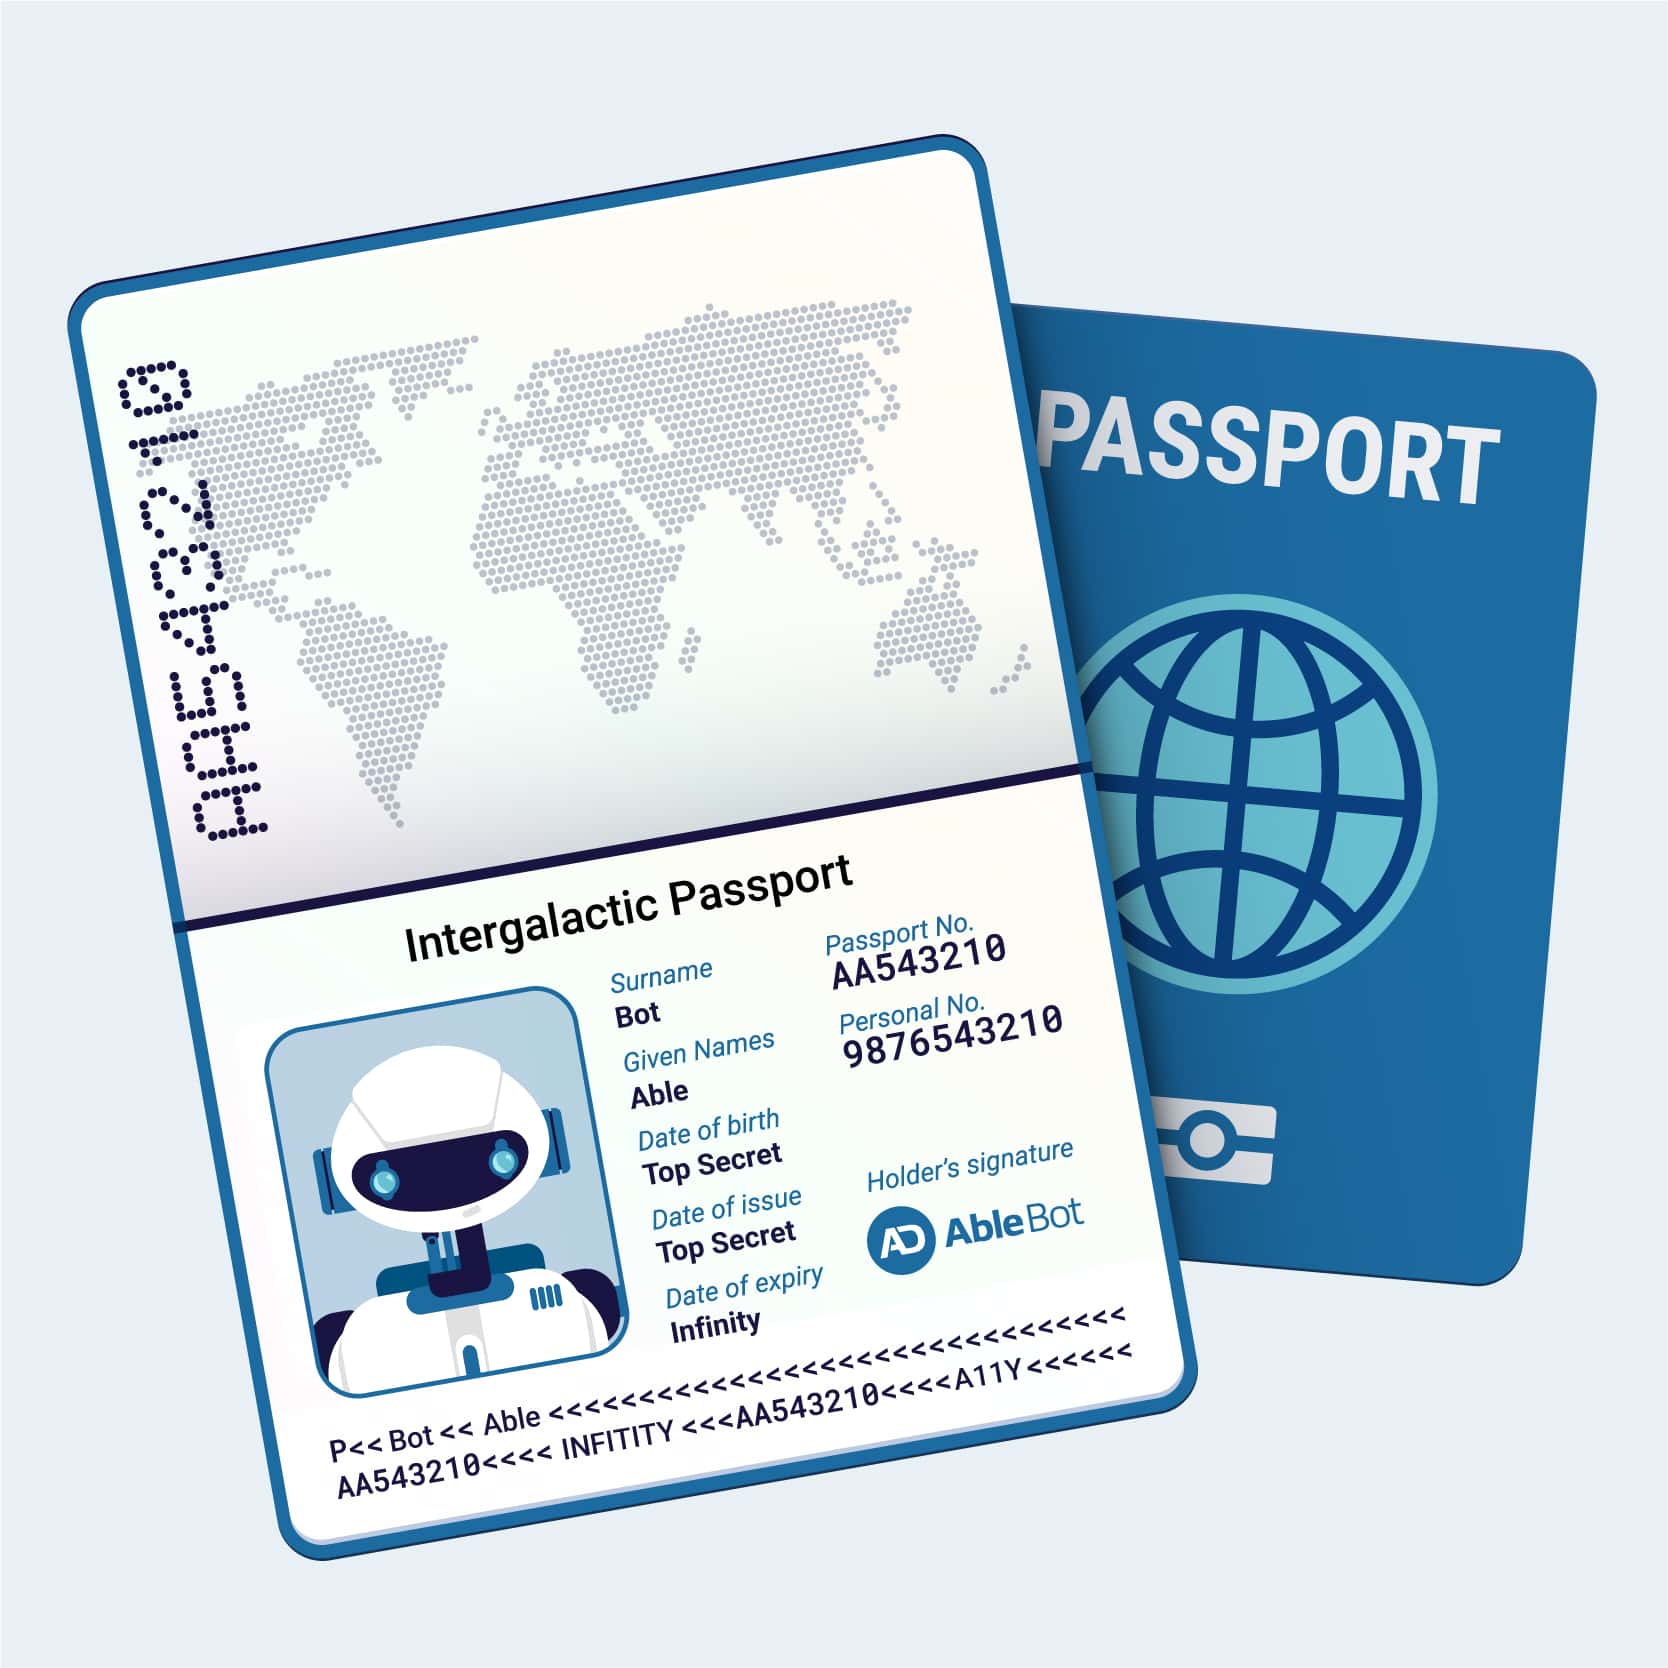 An illustration of AbleBot's passport.